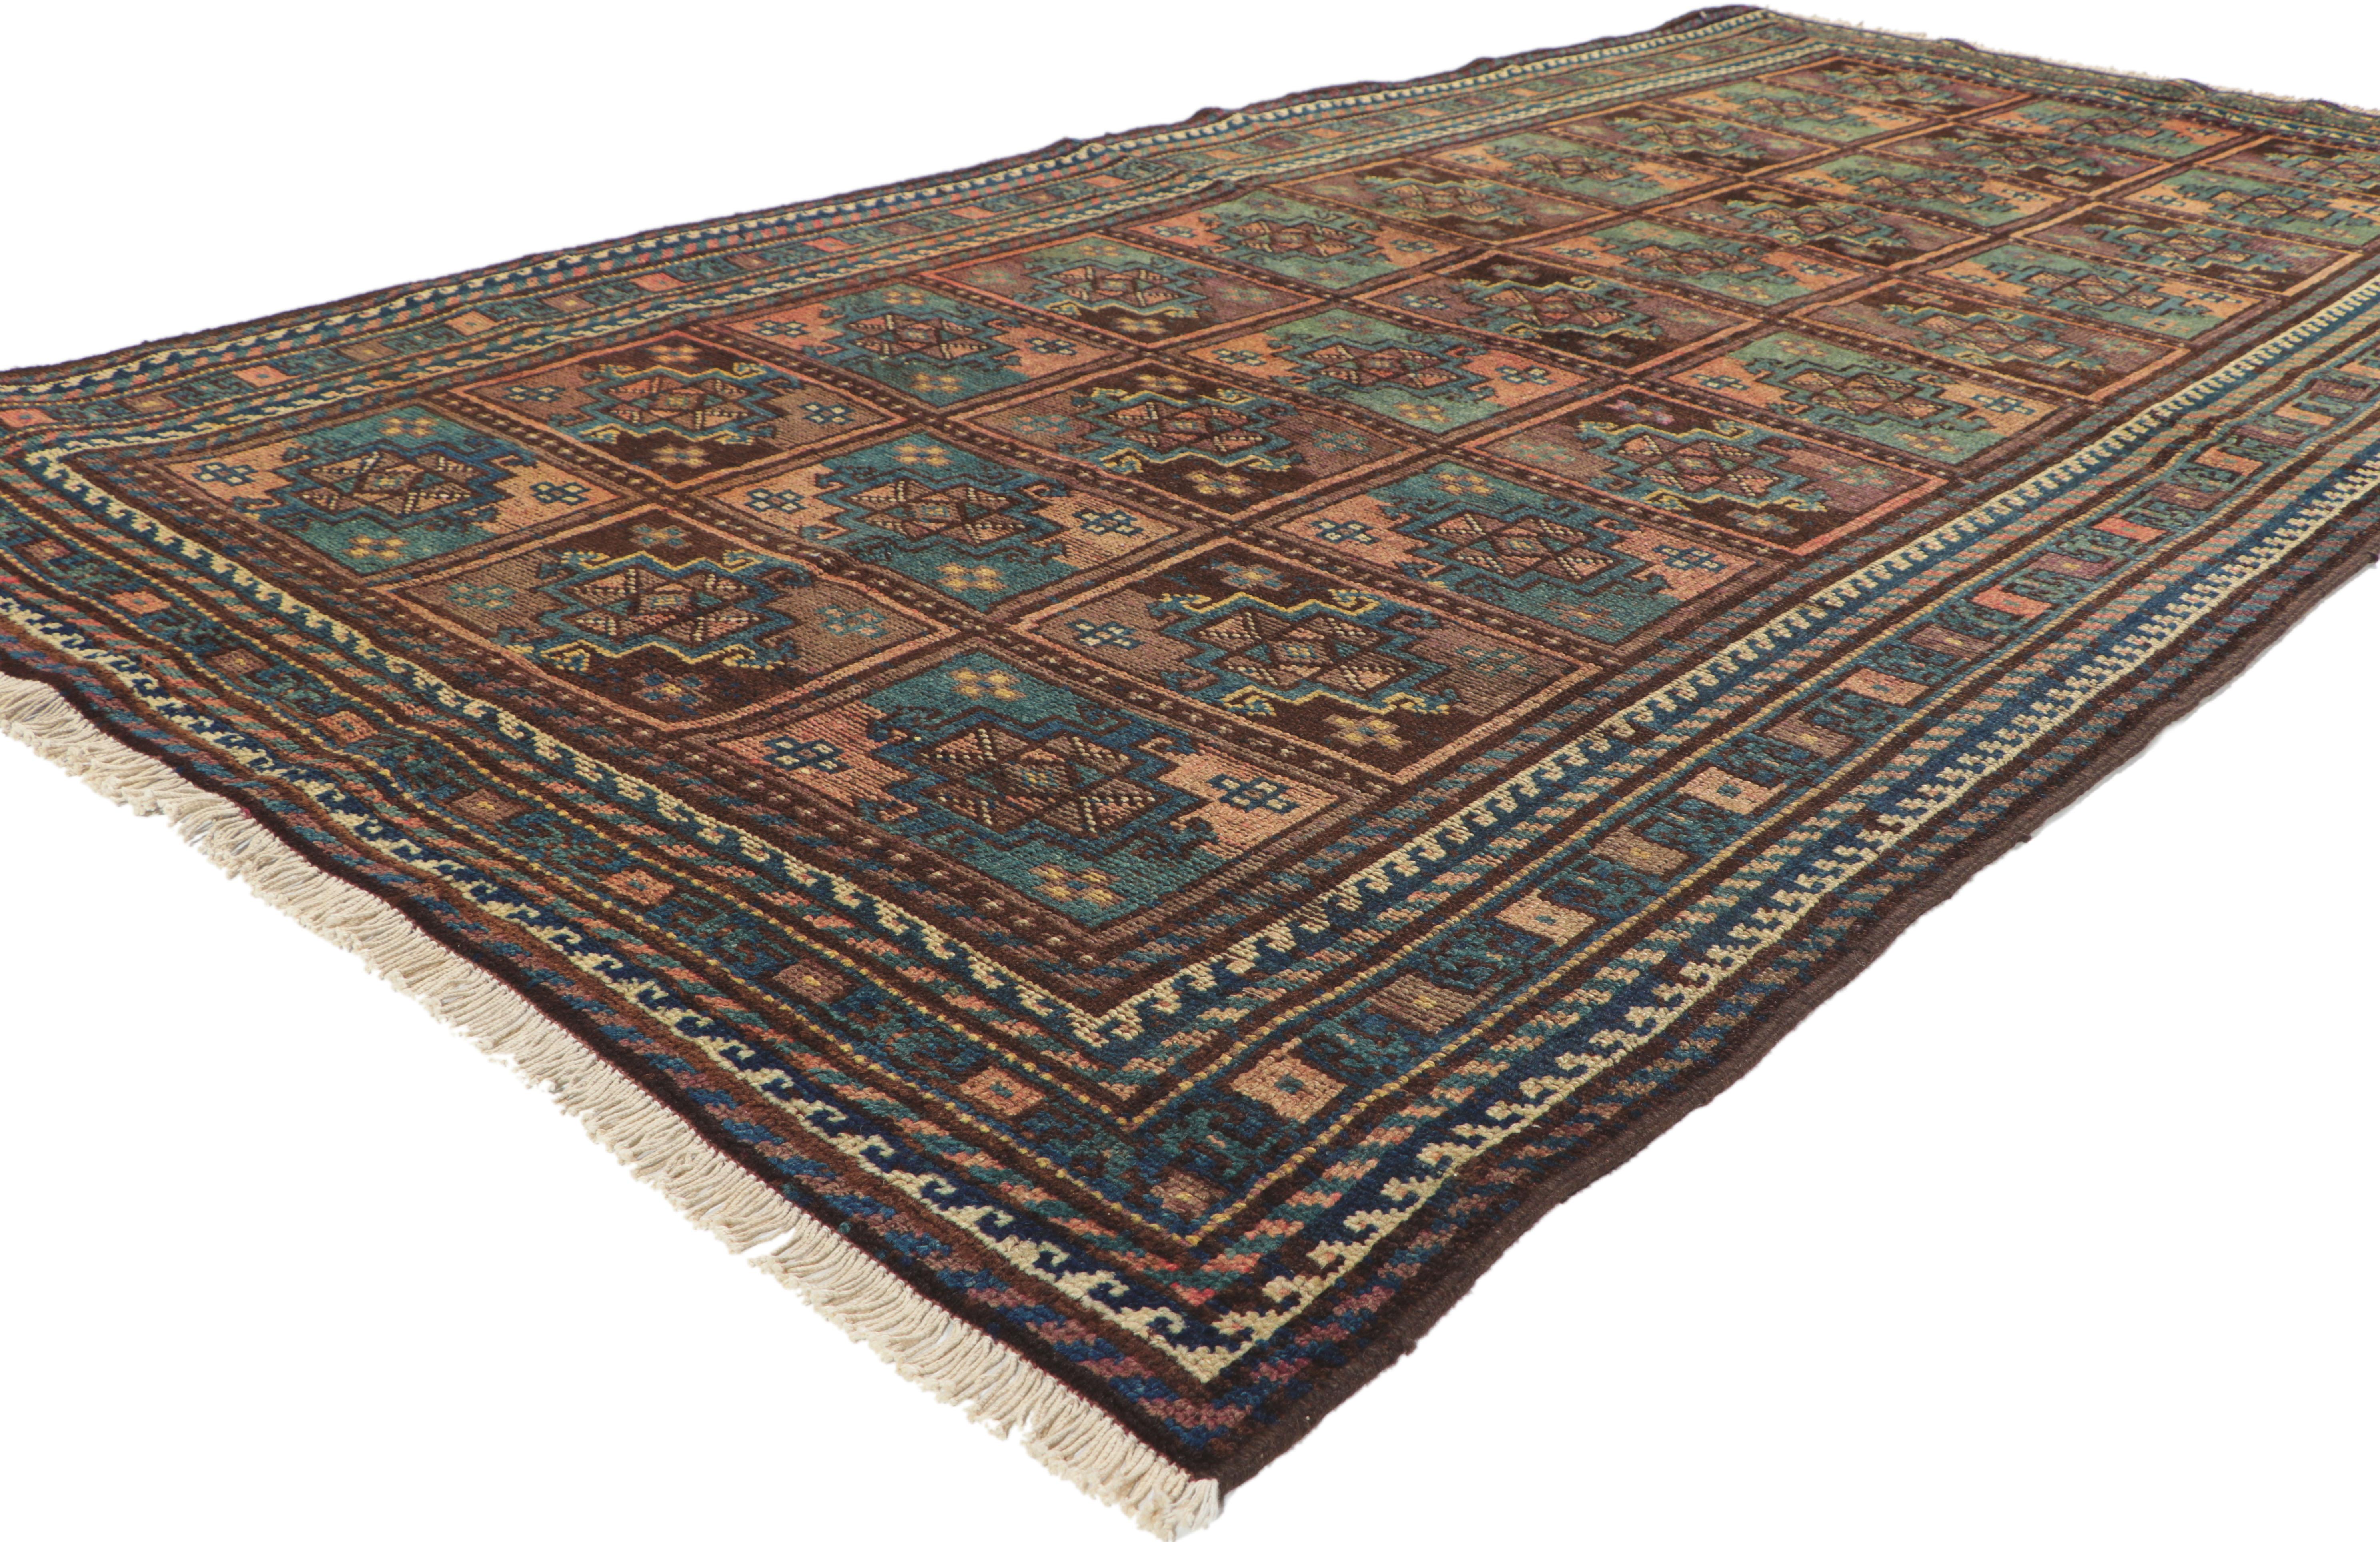 76432 Vintage Persian Shiraz Rug, 04'05 x 08'10. 
Full of tiny details with incredible detail and texture, this hand-knotted wool vintage Shiraz Persian rug is a captivating vision of woven beauty. The eye-catching garden design and earthy colorway